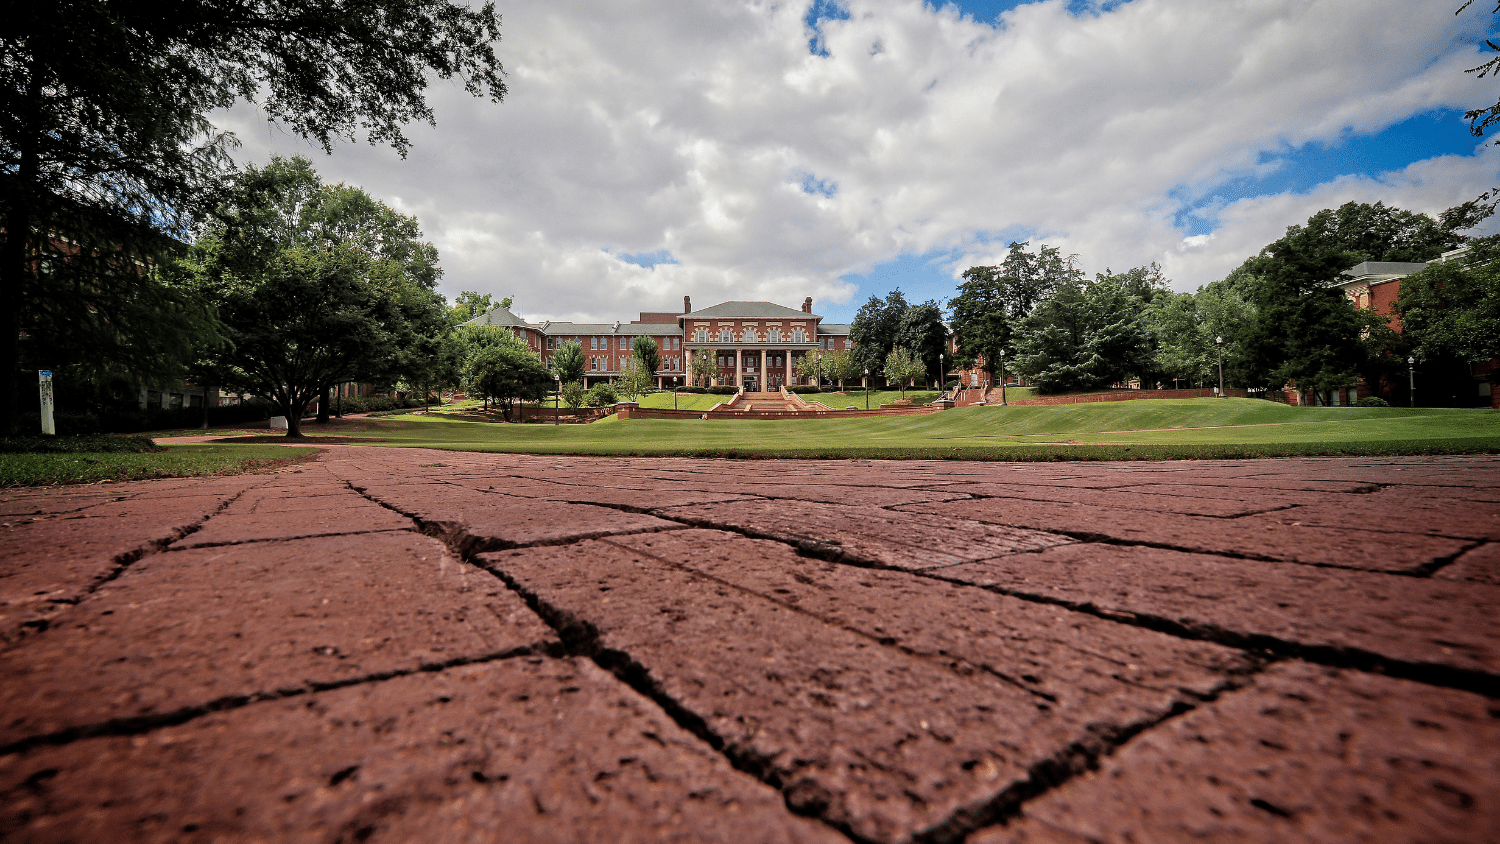 Court of Carolinas from wide scope angle showing bricks and blue sky full of clouds